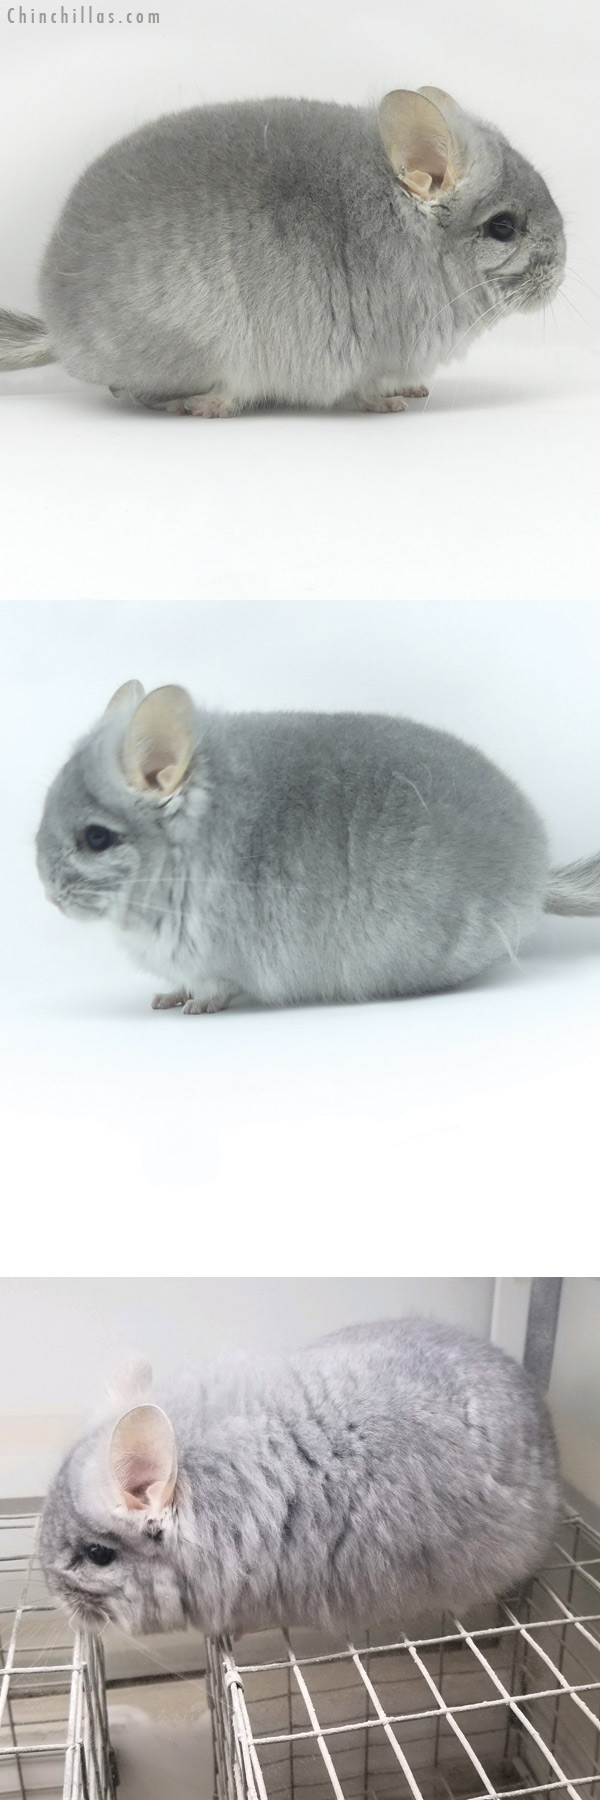 Chinchilla or related item offered for sale or export on Chinchillas.com - 19442 Exceptional Sapphire  Royal Persian Angora Male Chinchilla